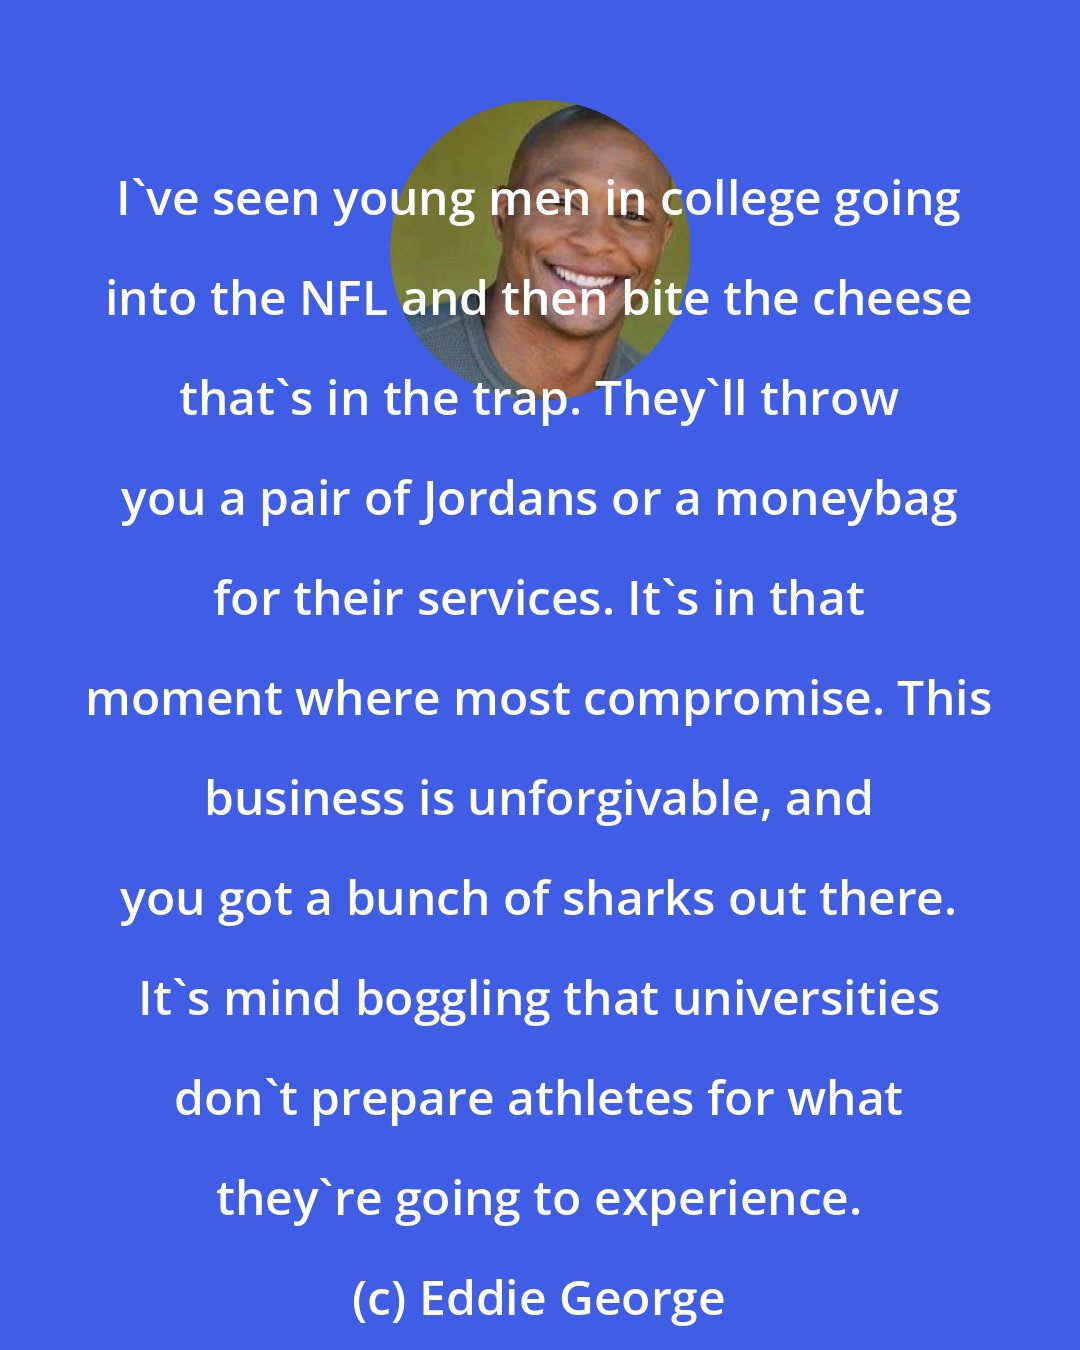 Eddie George: I've seen young men in college going into the NFL and then bite the cheese that's in the trap. They'll throw you a pair of Jordans or a moneybag for their services. It's in that moment where most compromise. This business is unforgivable, and you got a bunch of sharks out there. It's mind boggling that universities don't prepare athletes for what they're going to experience.